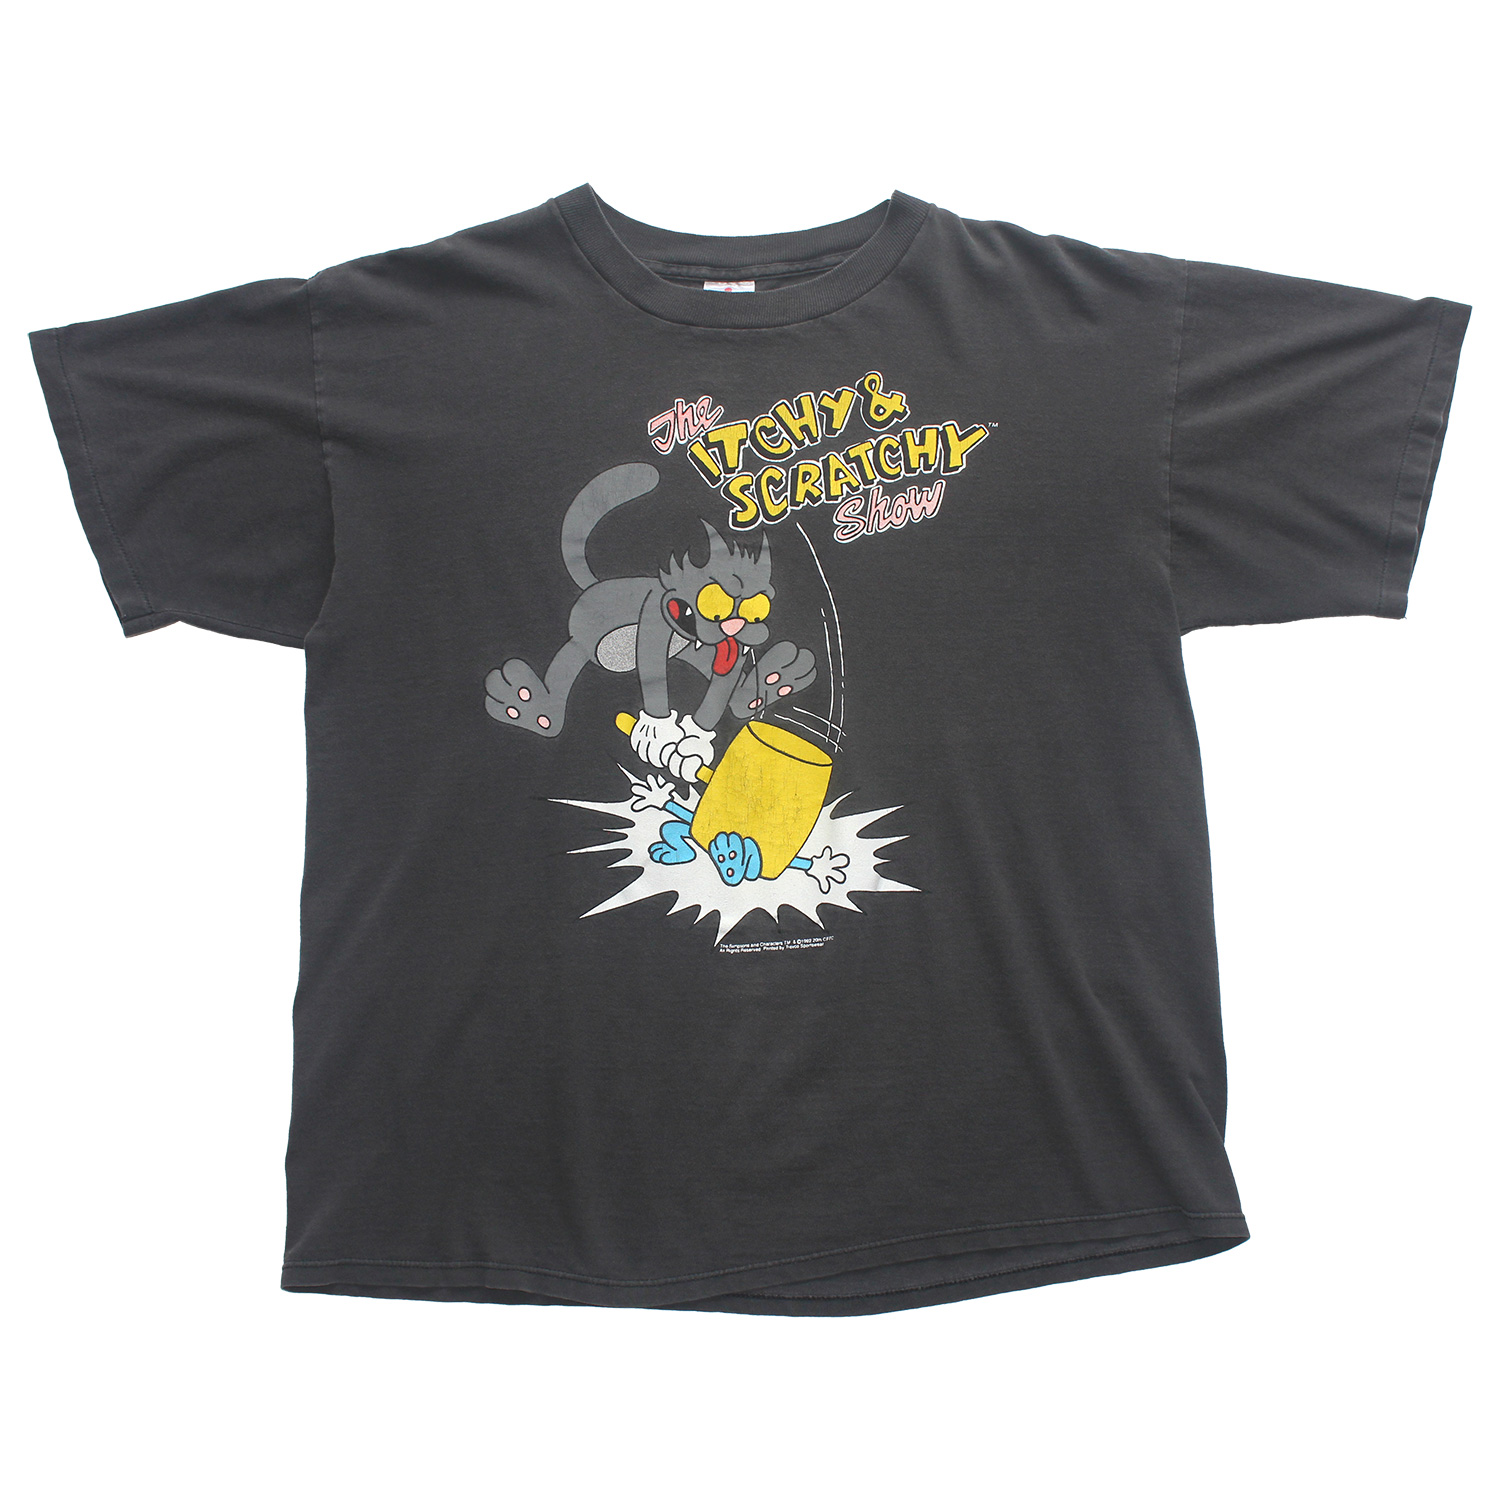 Vintage Itchy & Scratchy Show T-shirt | Black Shirts World